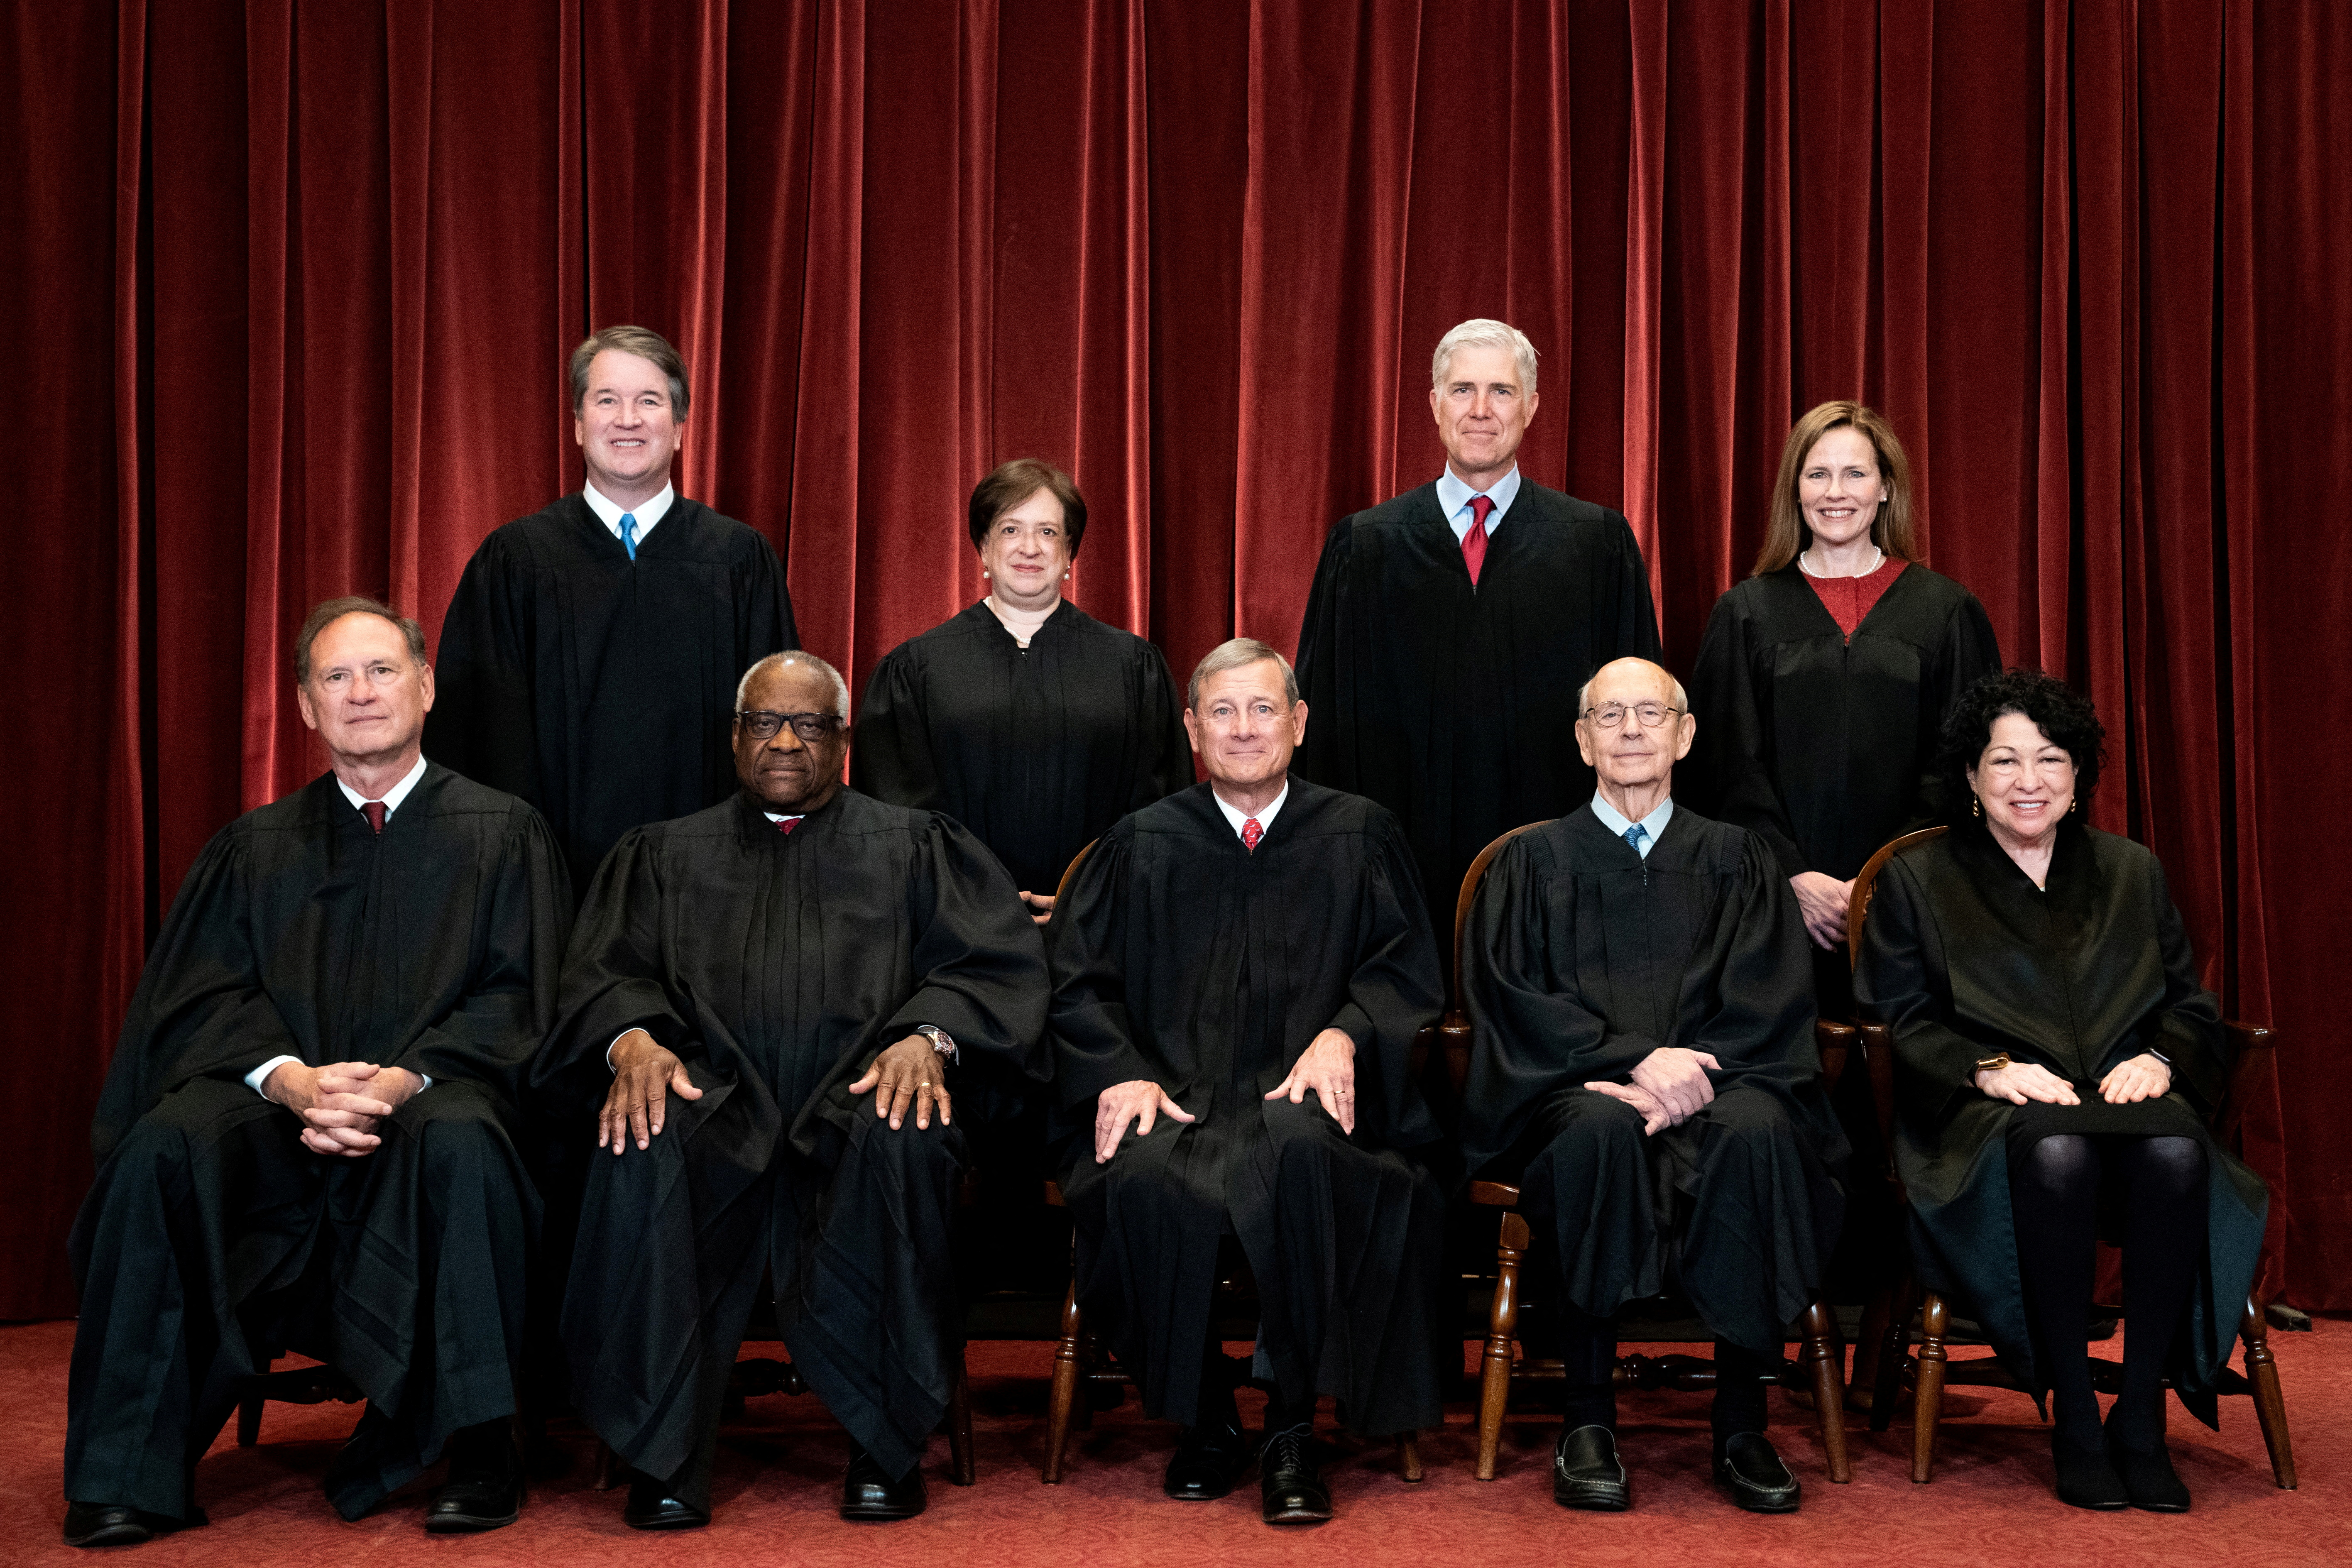 Group photo at the Supreme Court in Washington